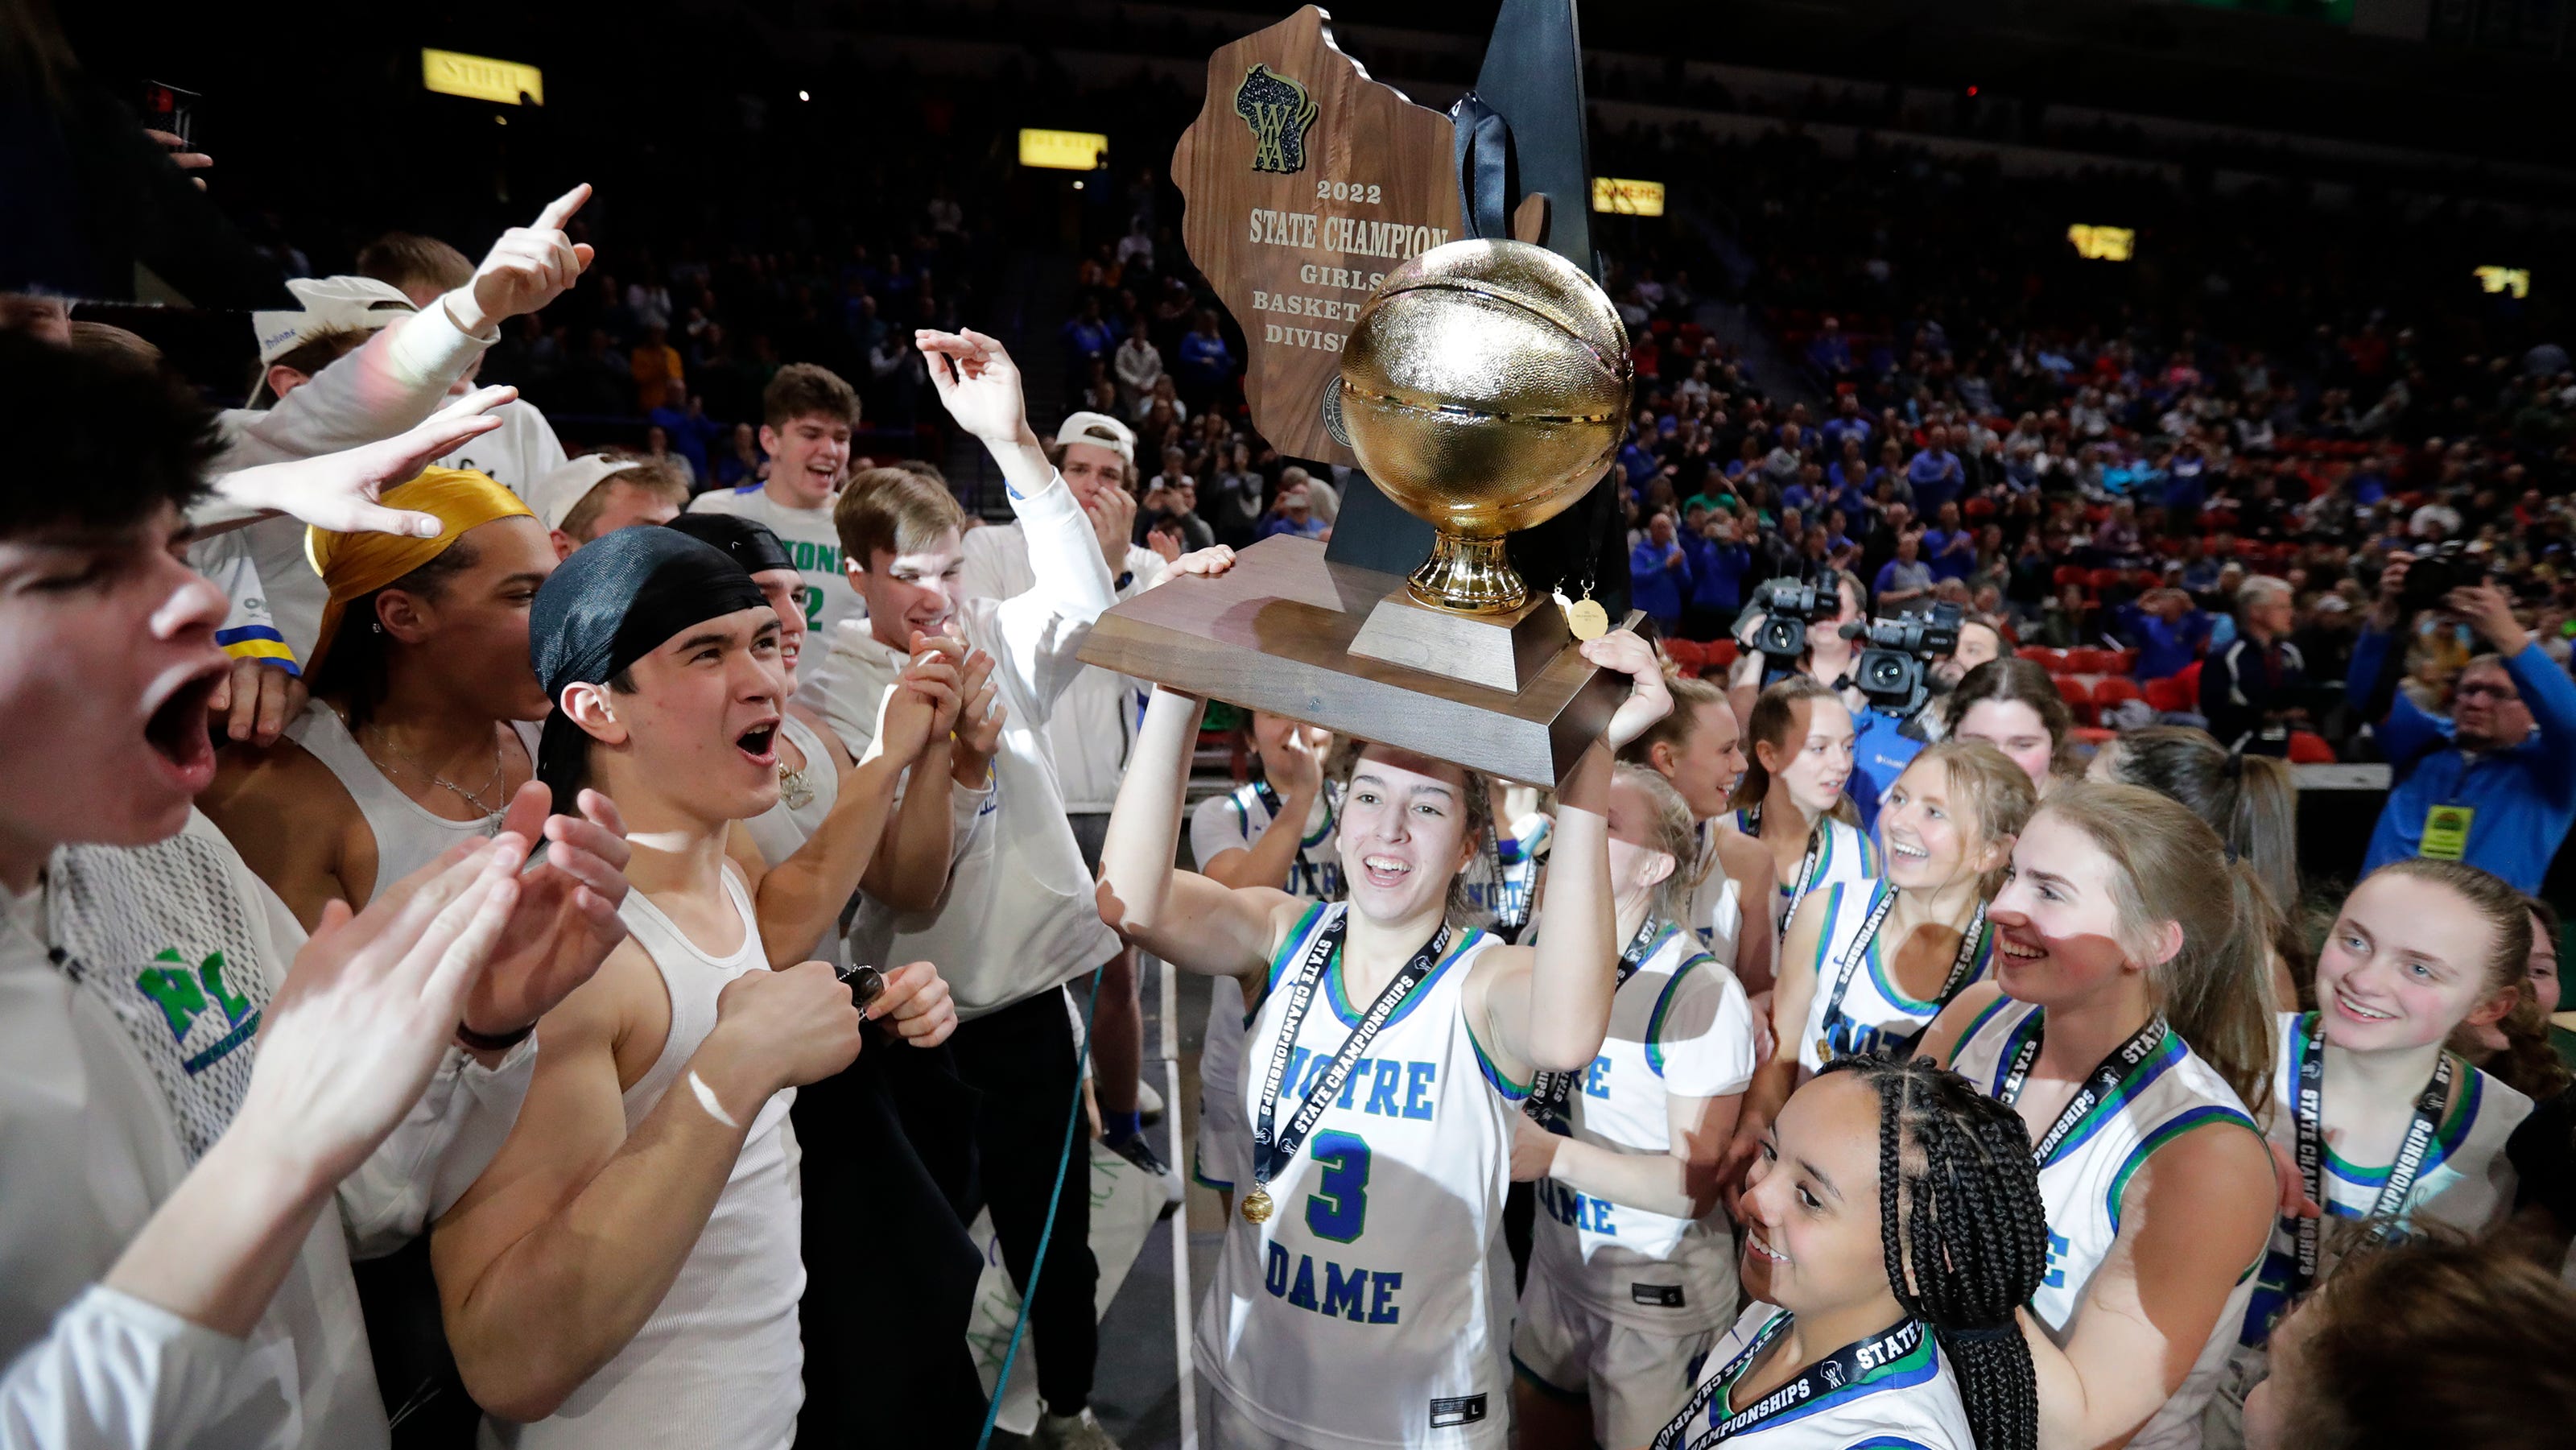 Green Bay Notre Dame girls basketball team repeats as state champions